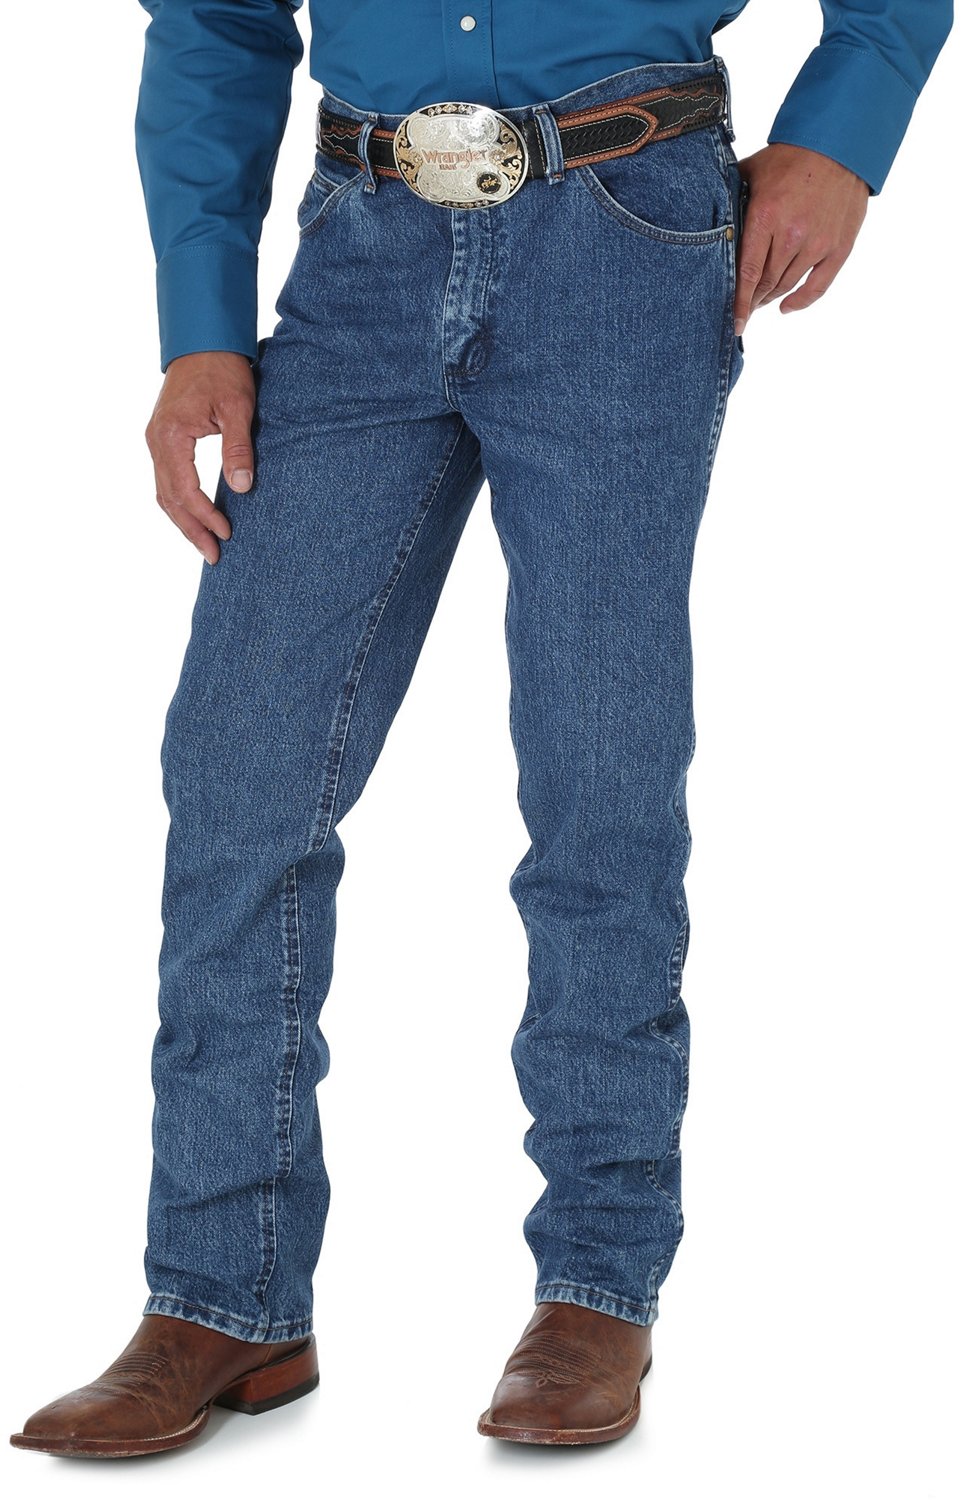 Slim Fit Jeans for Men | Price Match Guaranteed